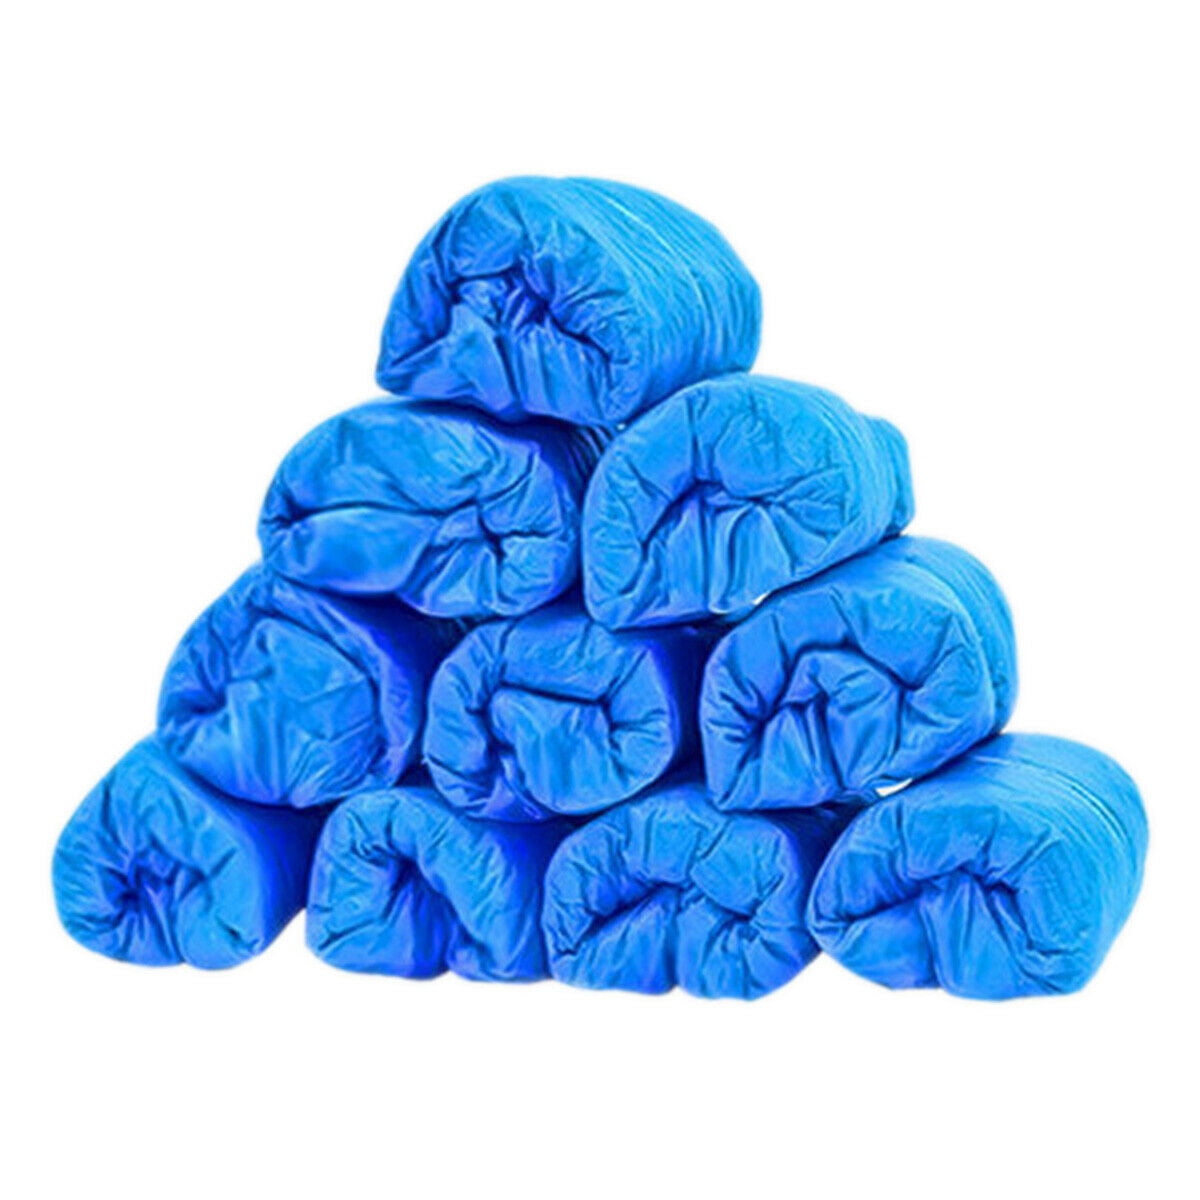 uxcell Household Elastic Band Disposable Carpet Clean Shoes Cover 100pcs Blue 